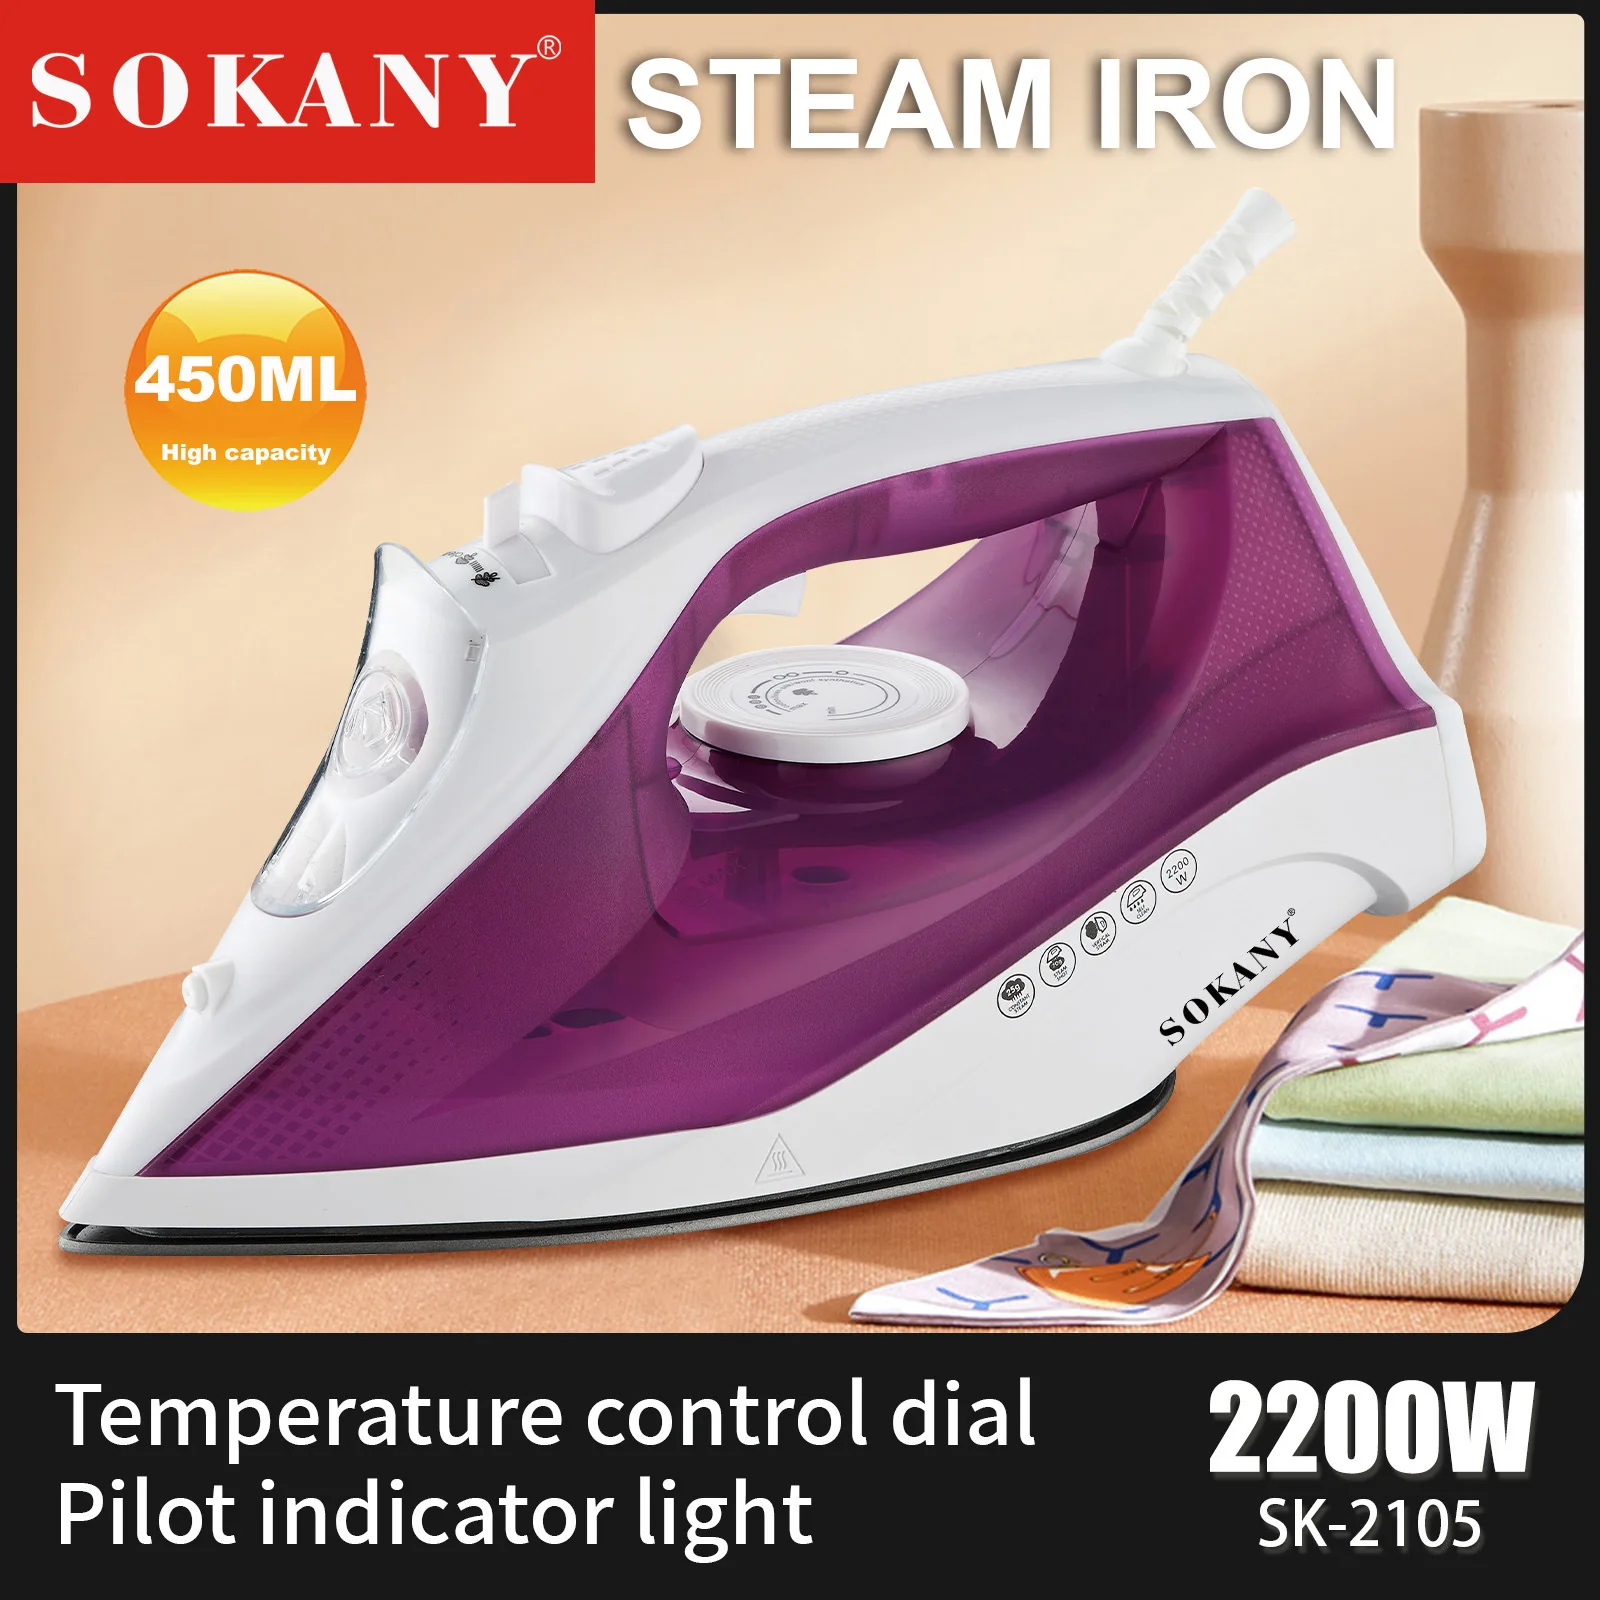 

Ceramic Soleplate Steam Iron for Clothes 2200 Watts Ironing, 450ml Water Tank Fabric Steamer, Garment Steamer, Powerful Steam